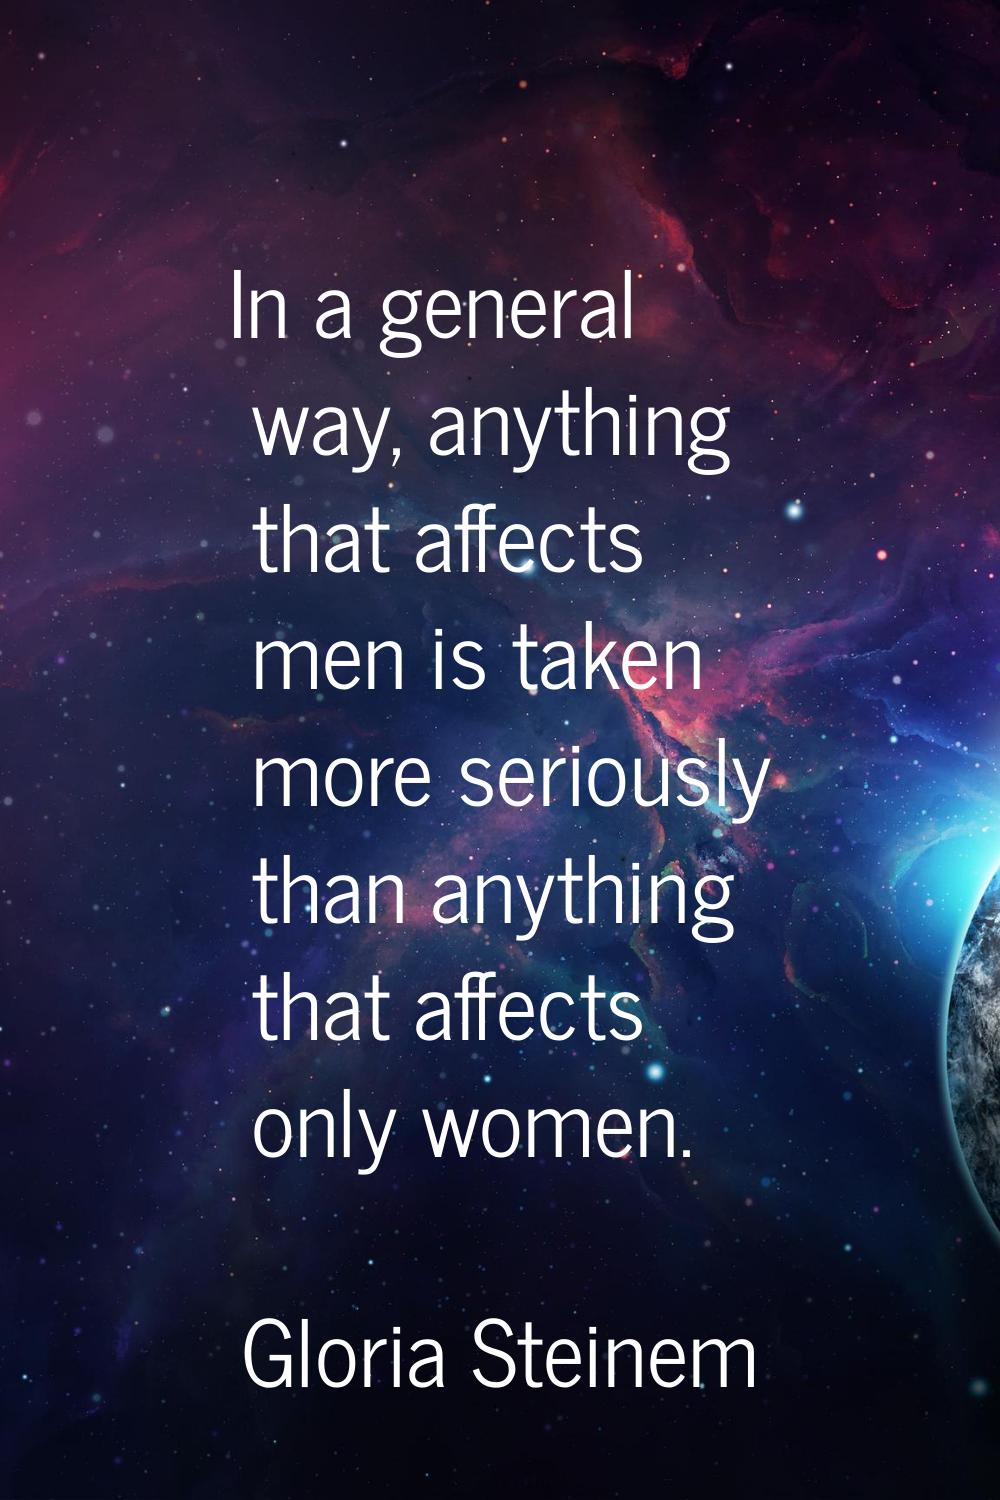 In a general way, anything that affects men is taken more seriously than anything that affects only